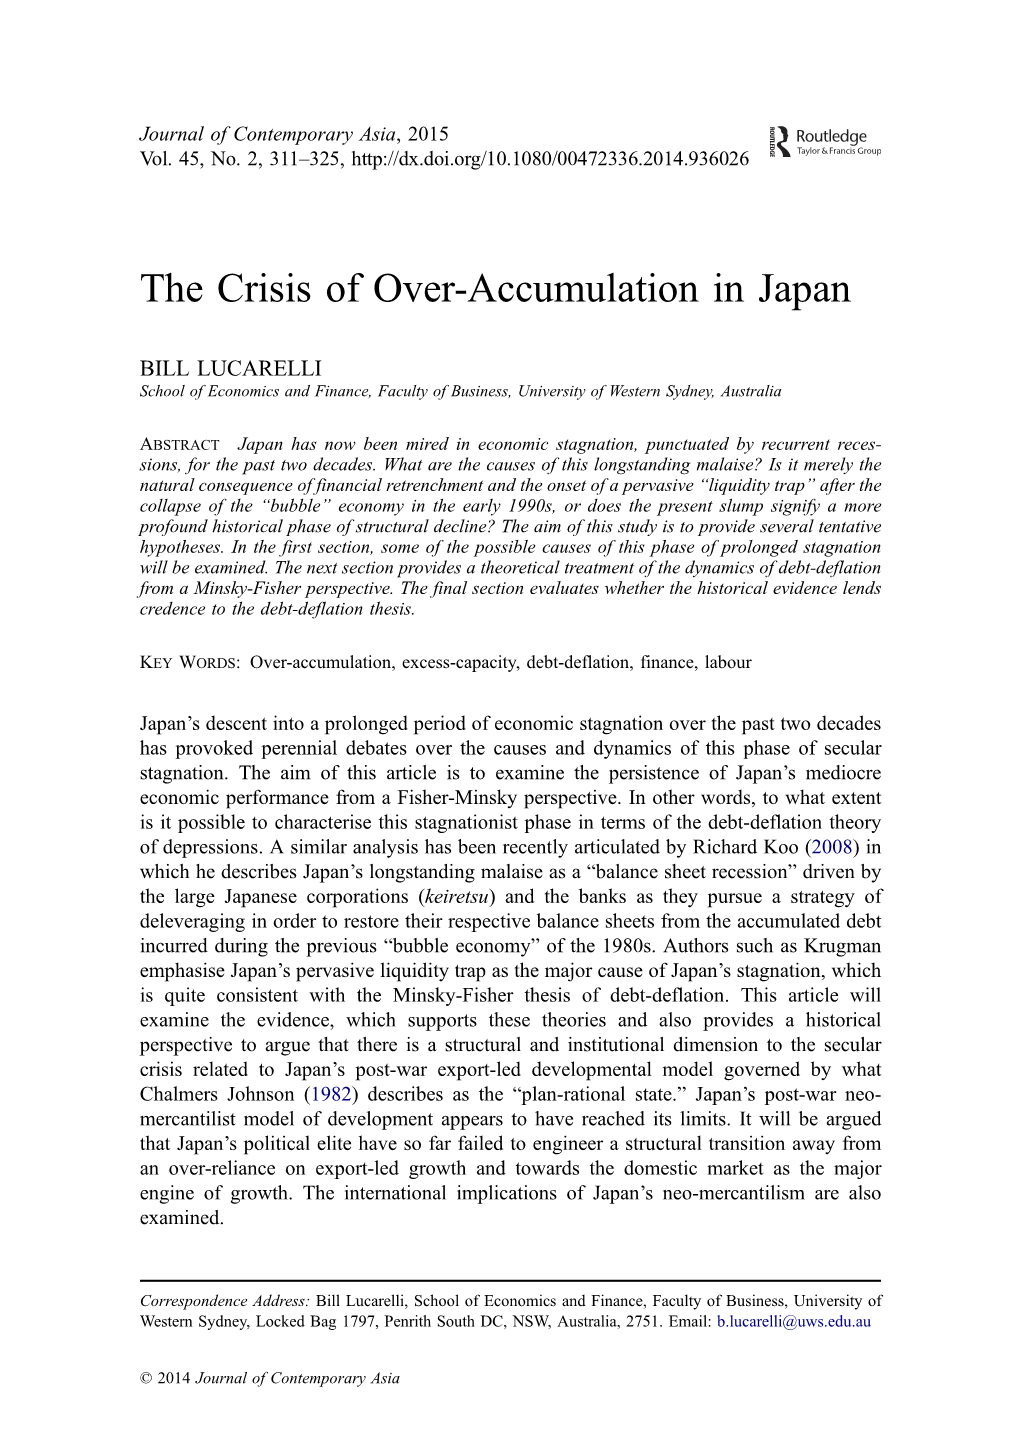 The Crisis of Over-Accumulation in Japan